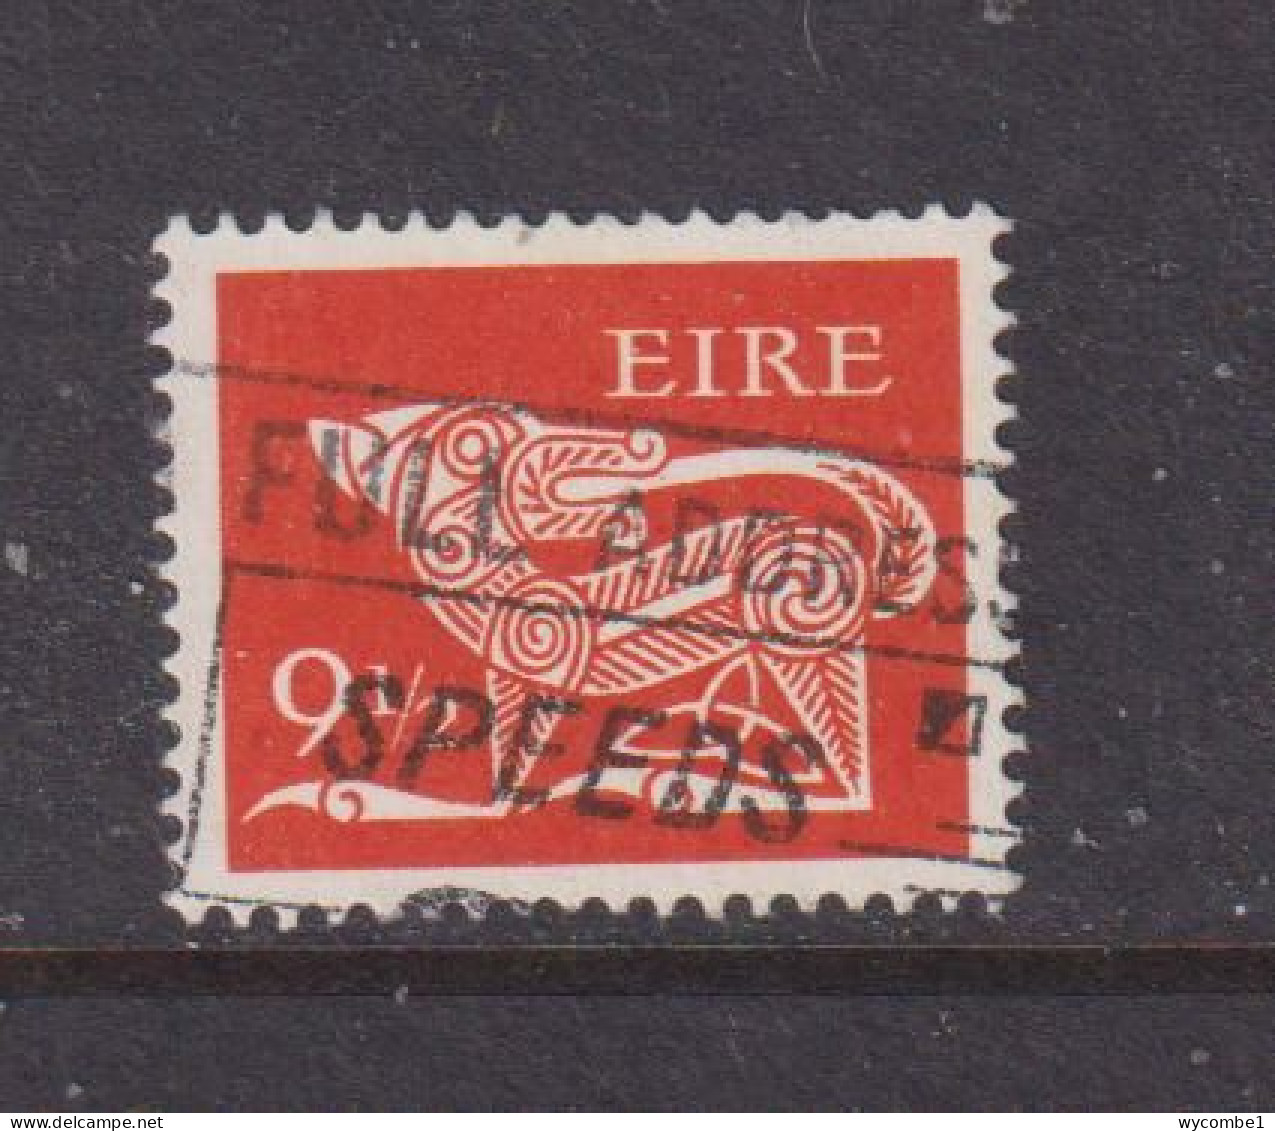 IRELAND - 1971  Decimal Currency Definitives  91/2p  Used As Scan - Usati